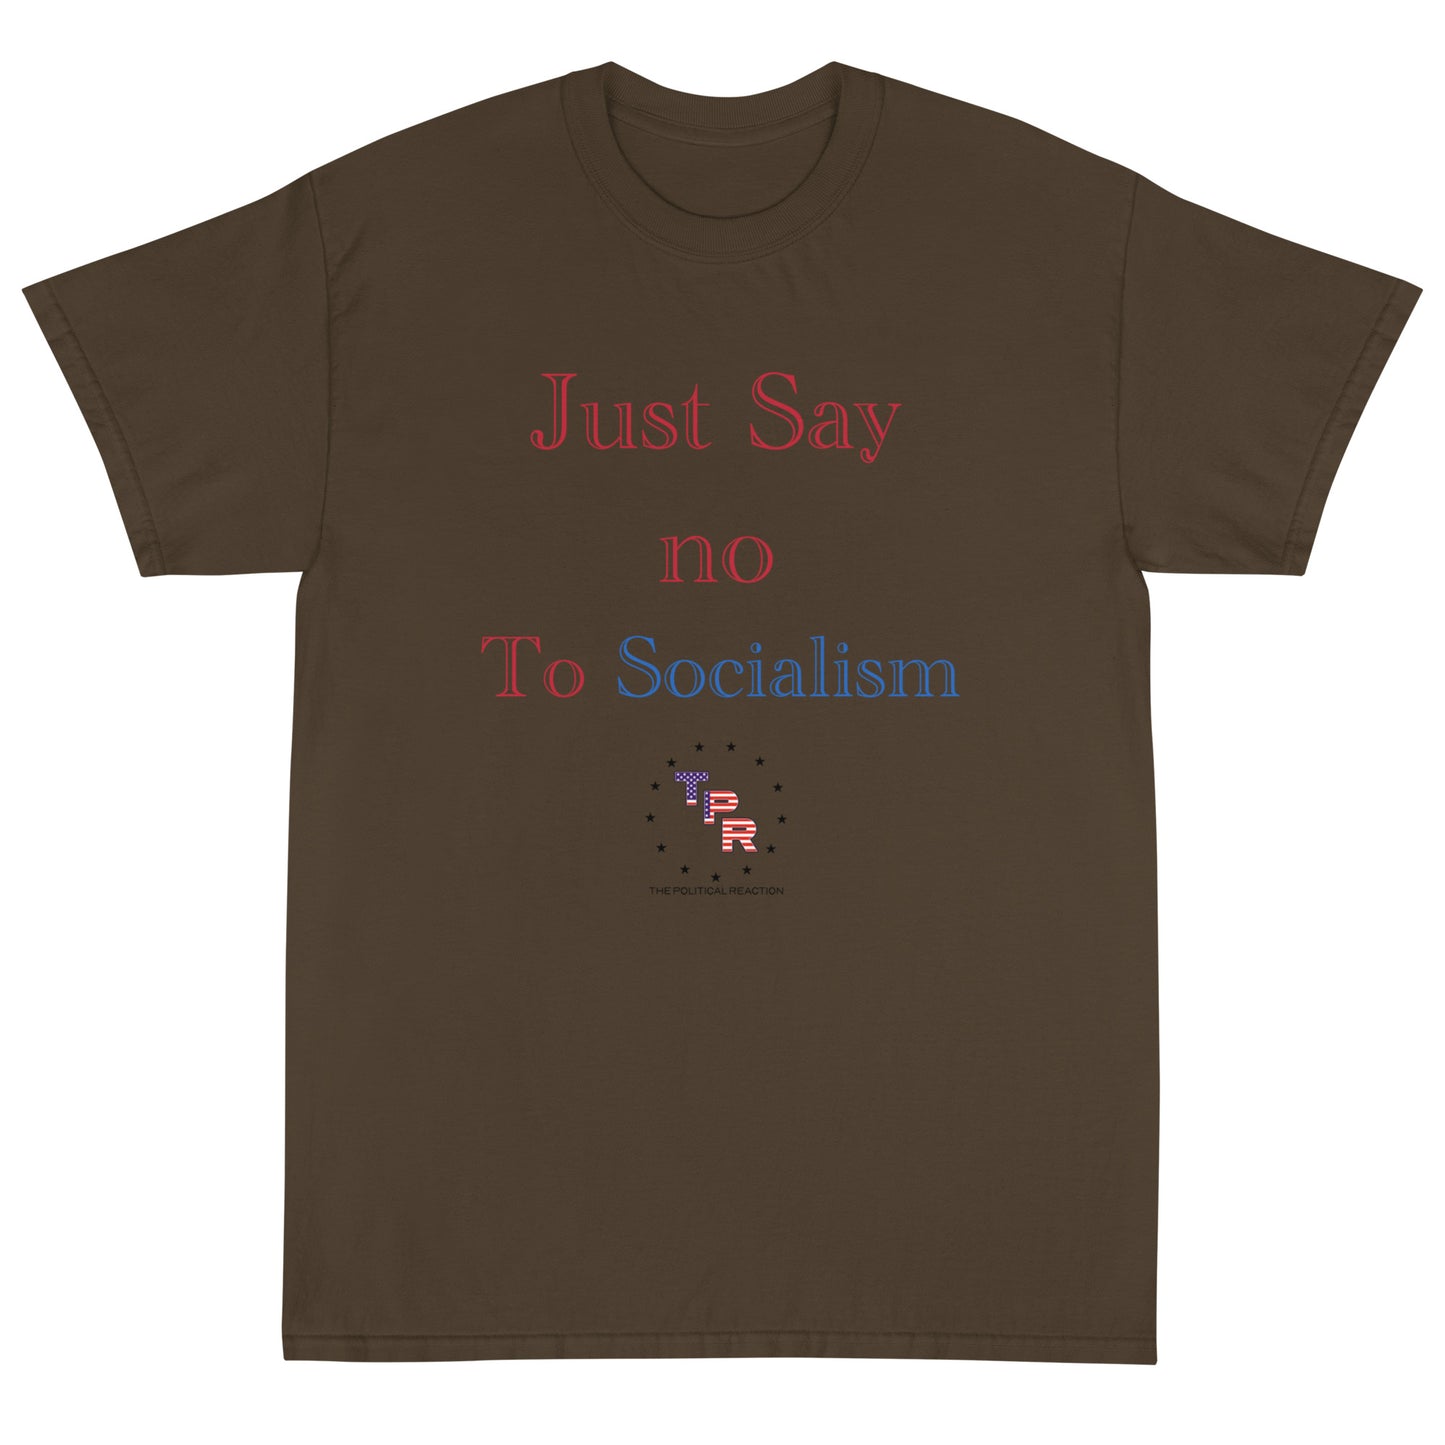 Just-say-no-to-socialism-t-shirt-Olive